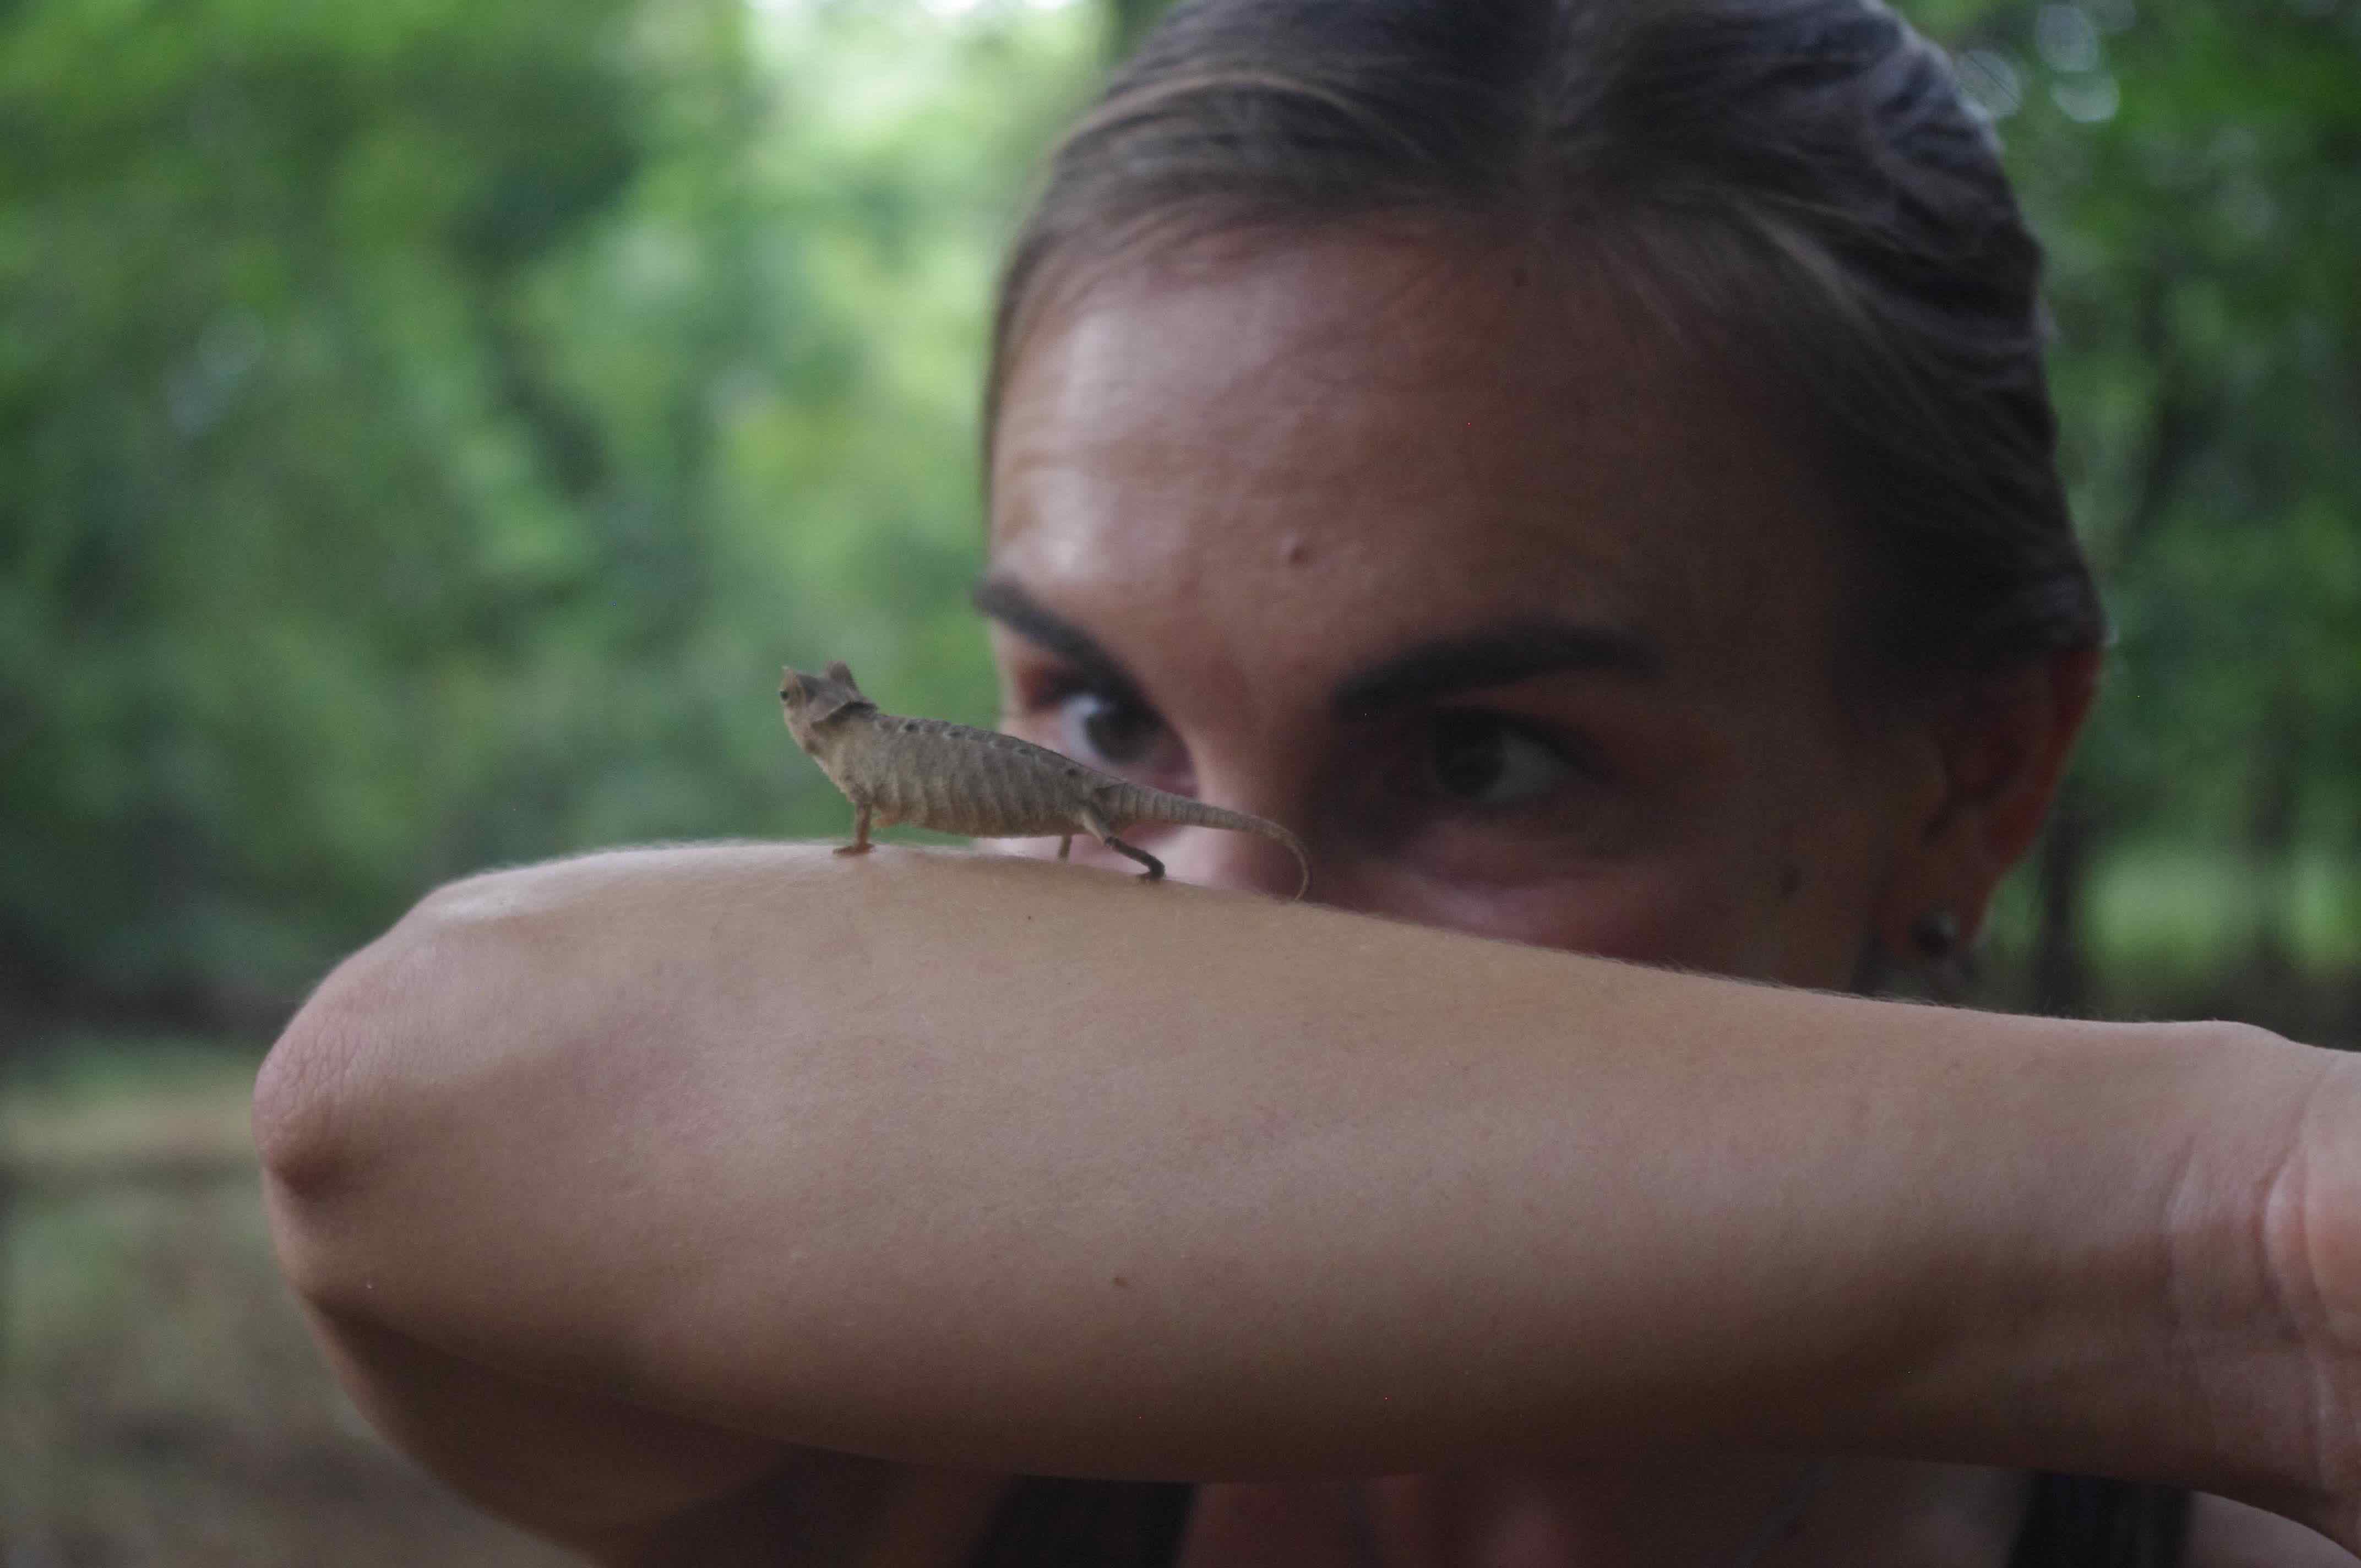 Cara blogged for National Geographic throughout her PhD. Read her doctoral chronicles of life as a field biologist studying emerging bat-borne viruses here.